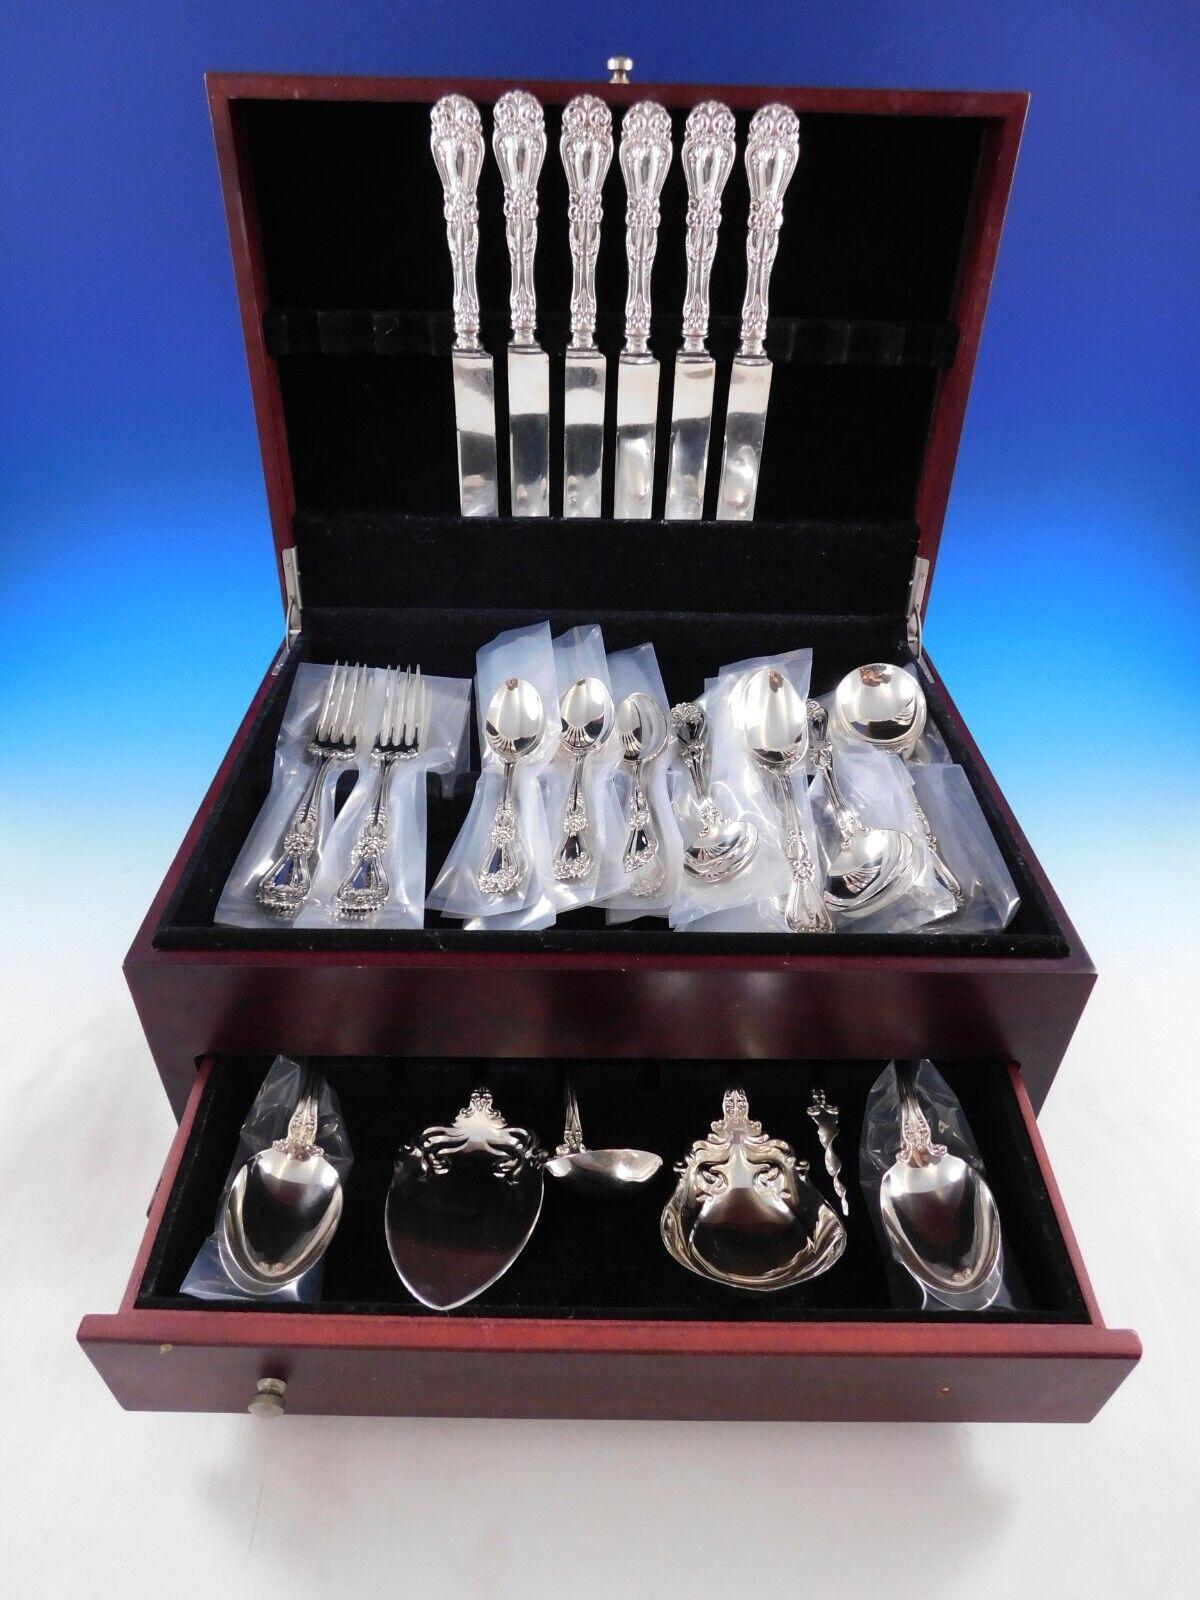 Rare Dinner Size Sorrento by Alvin, circa 1905, sterling silver Flatware set, 43 pieces. This set includes:

6 Dinner Size Knives, w/blunt plated blades, 10